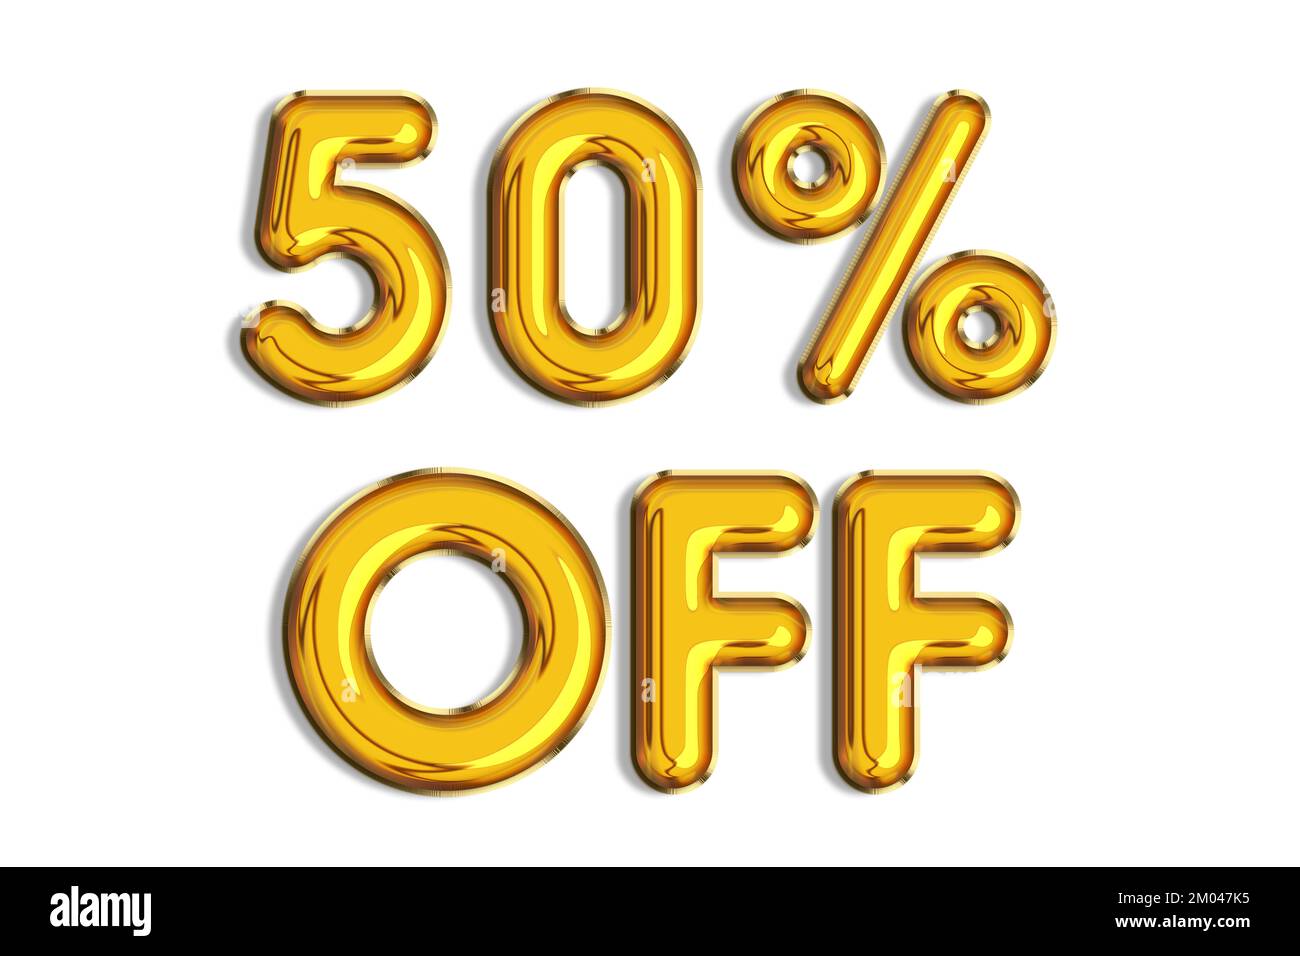 50% off discount promotion sale made of realistic 3d gold helium balloons. Illustration of golden percent symbol for selling poster, banner, ads, shop Stock Photo